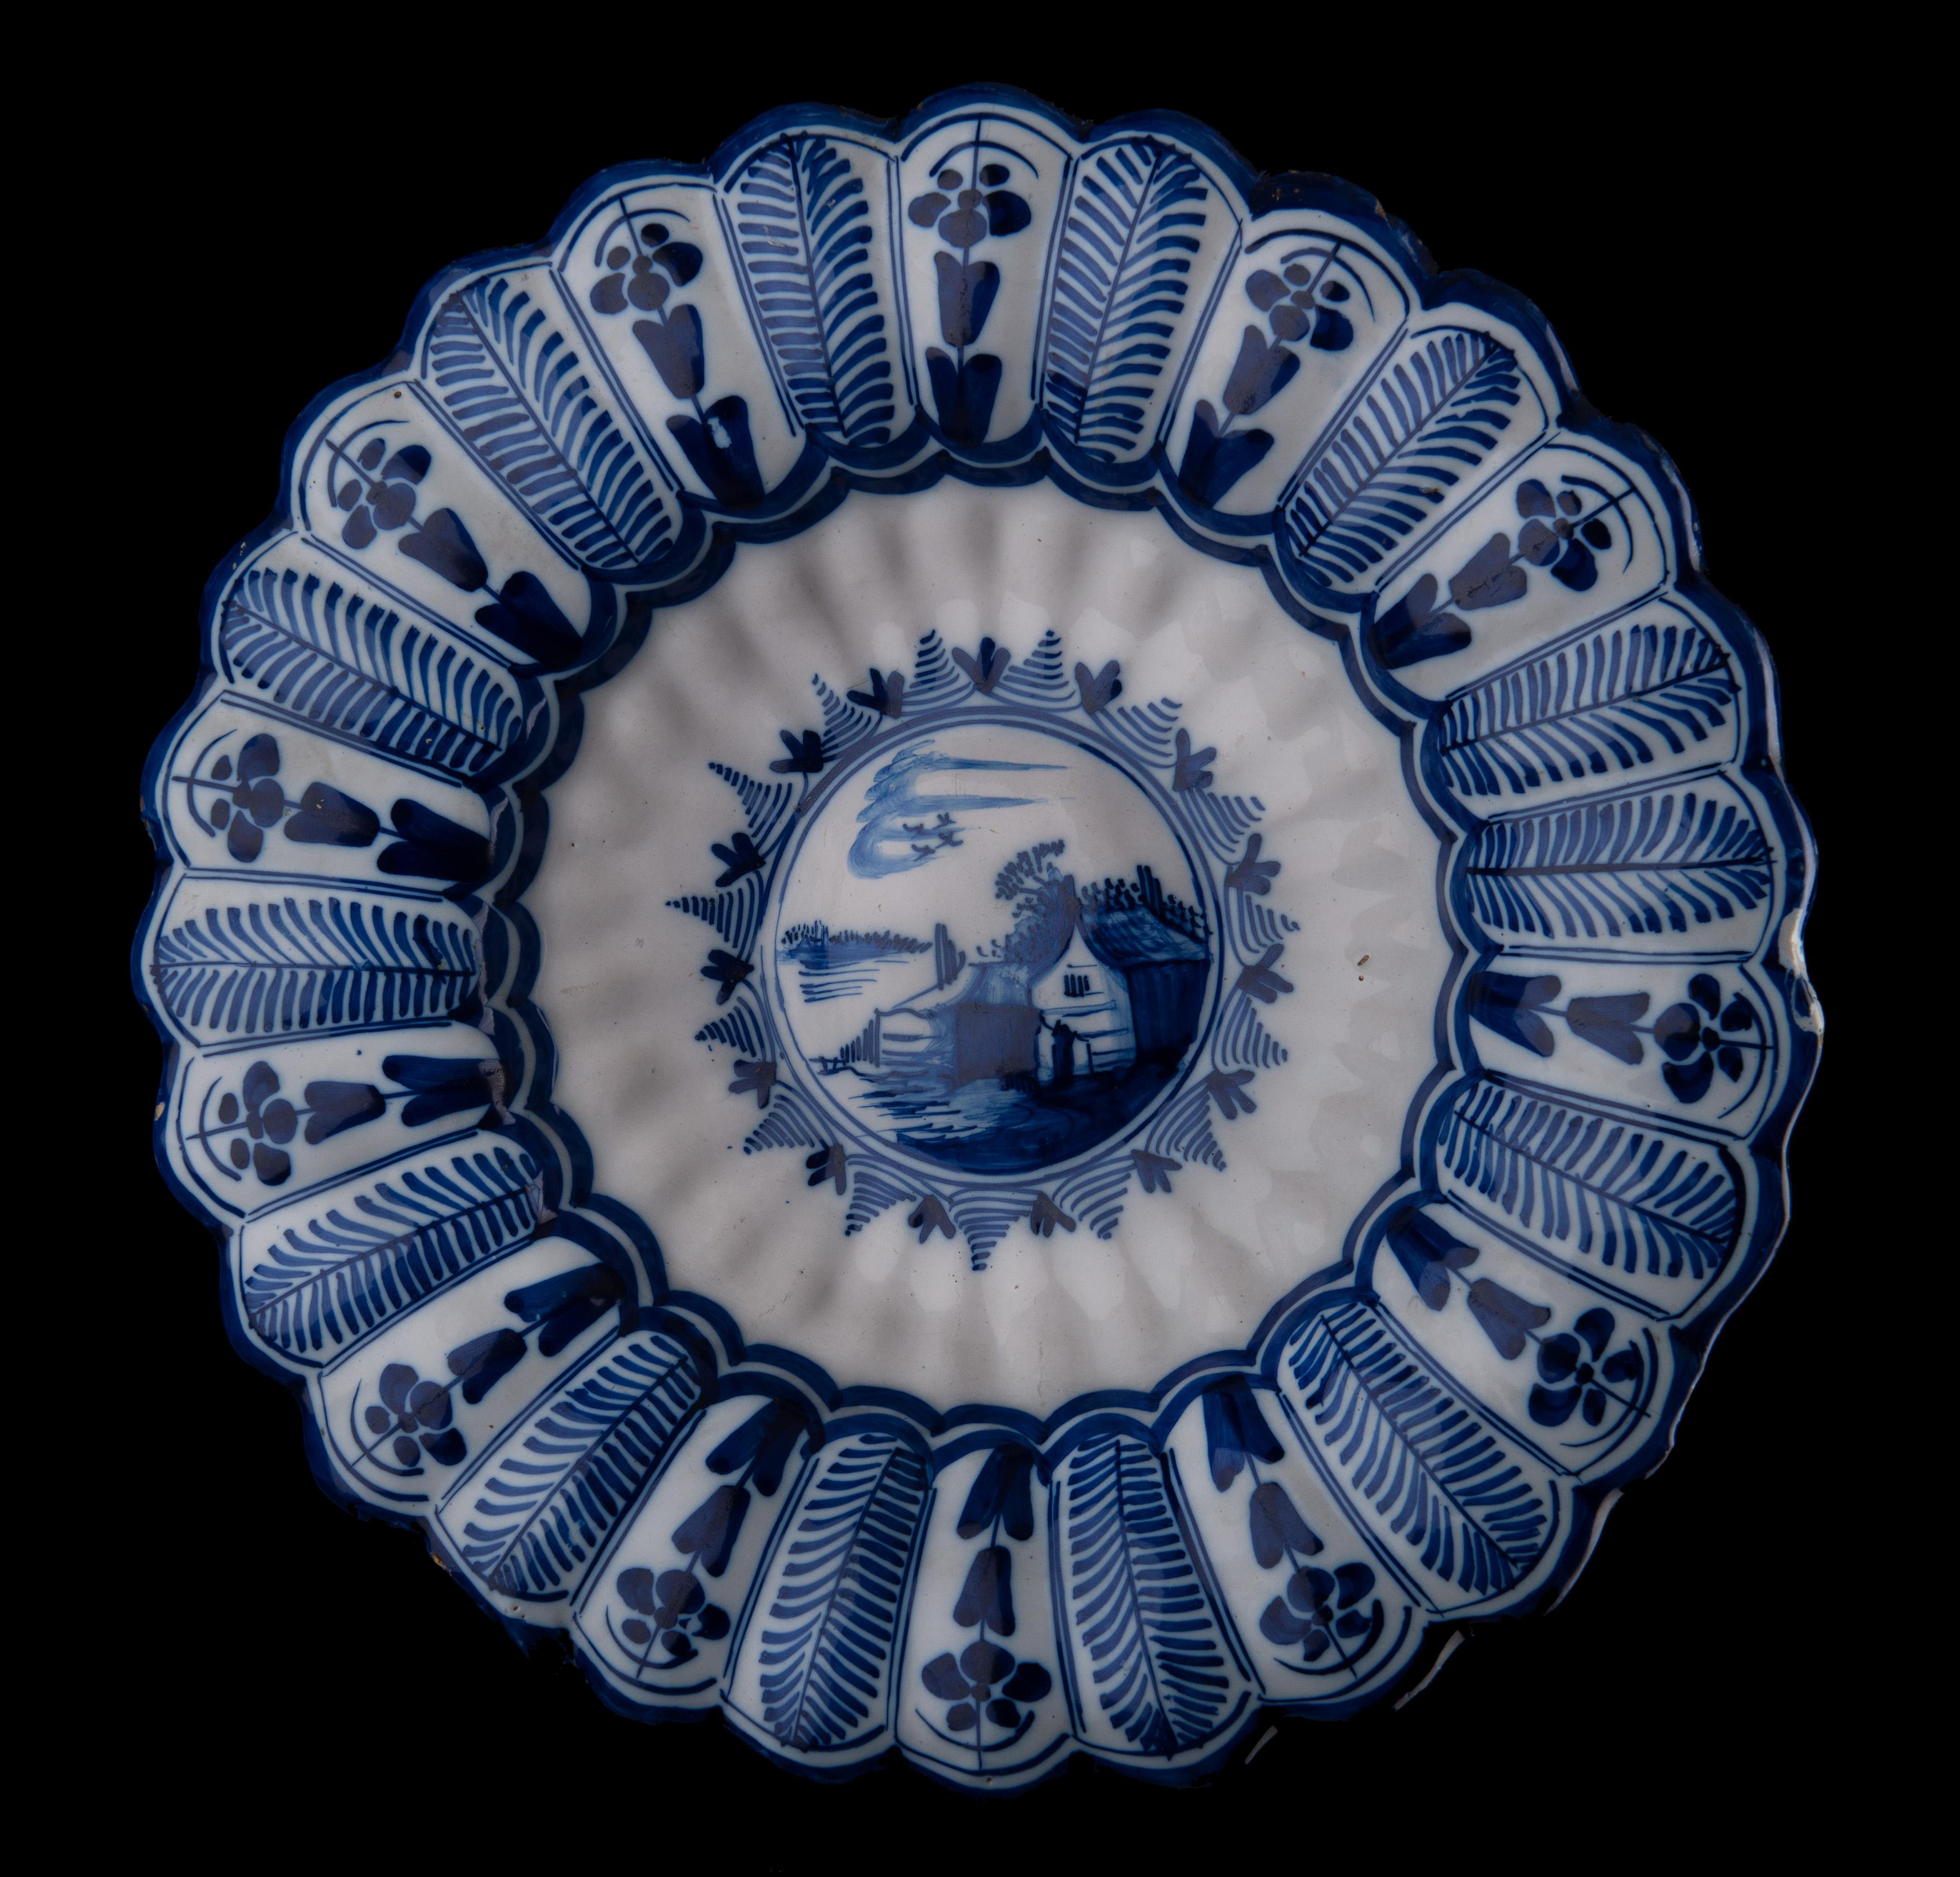 Blue and white lobed dish with landscape. Northern Netherlands, 1650-1680.
Dimensions: diameter 33 cm / 13 in. 

The blue and white dish is composed of twenty-seven double lobes around a curved center. It is painted with a house and barn along